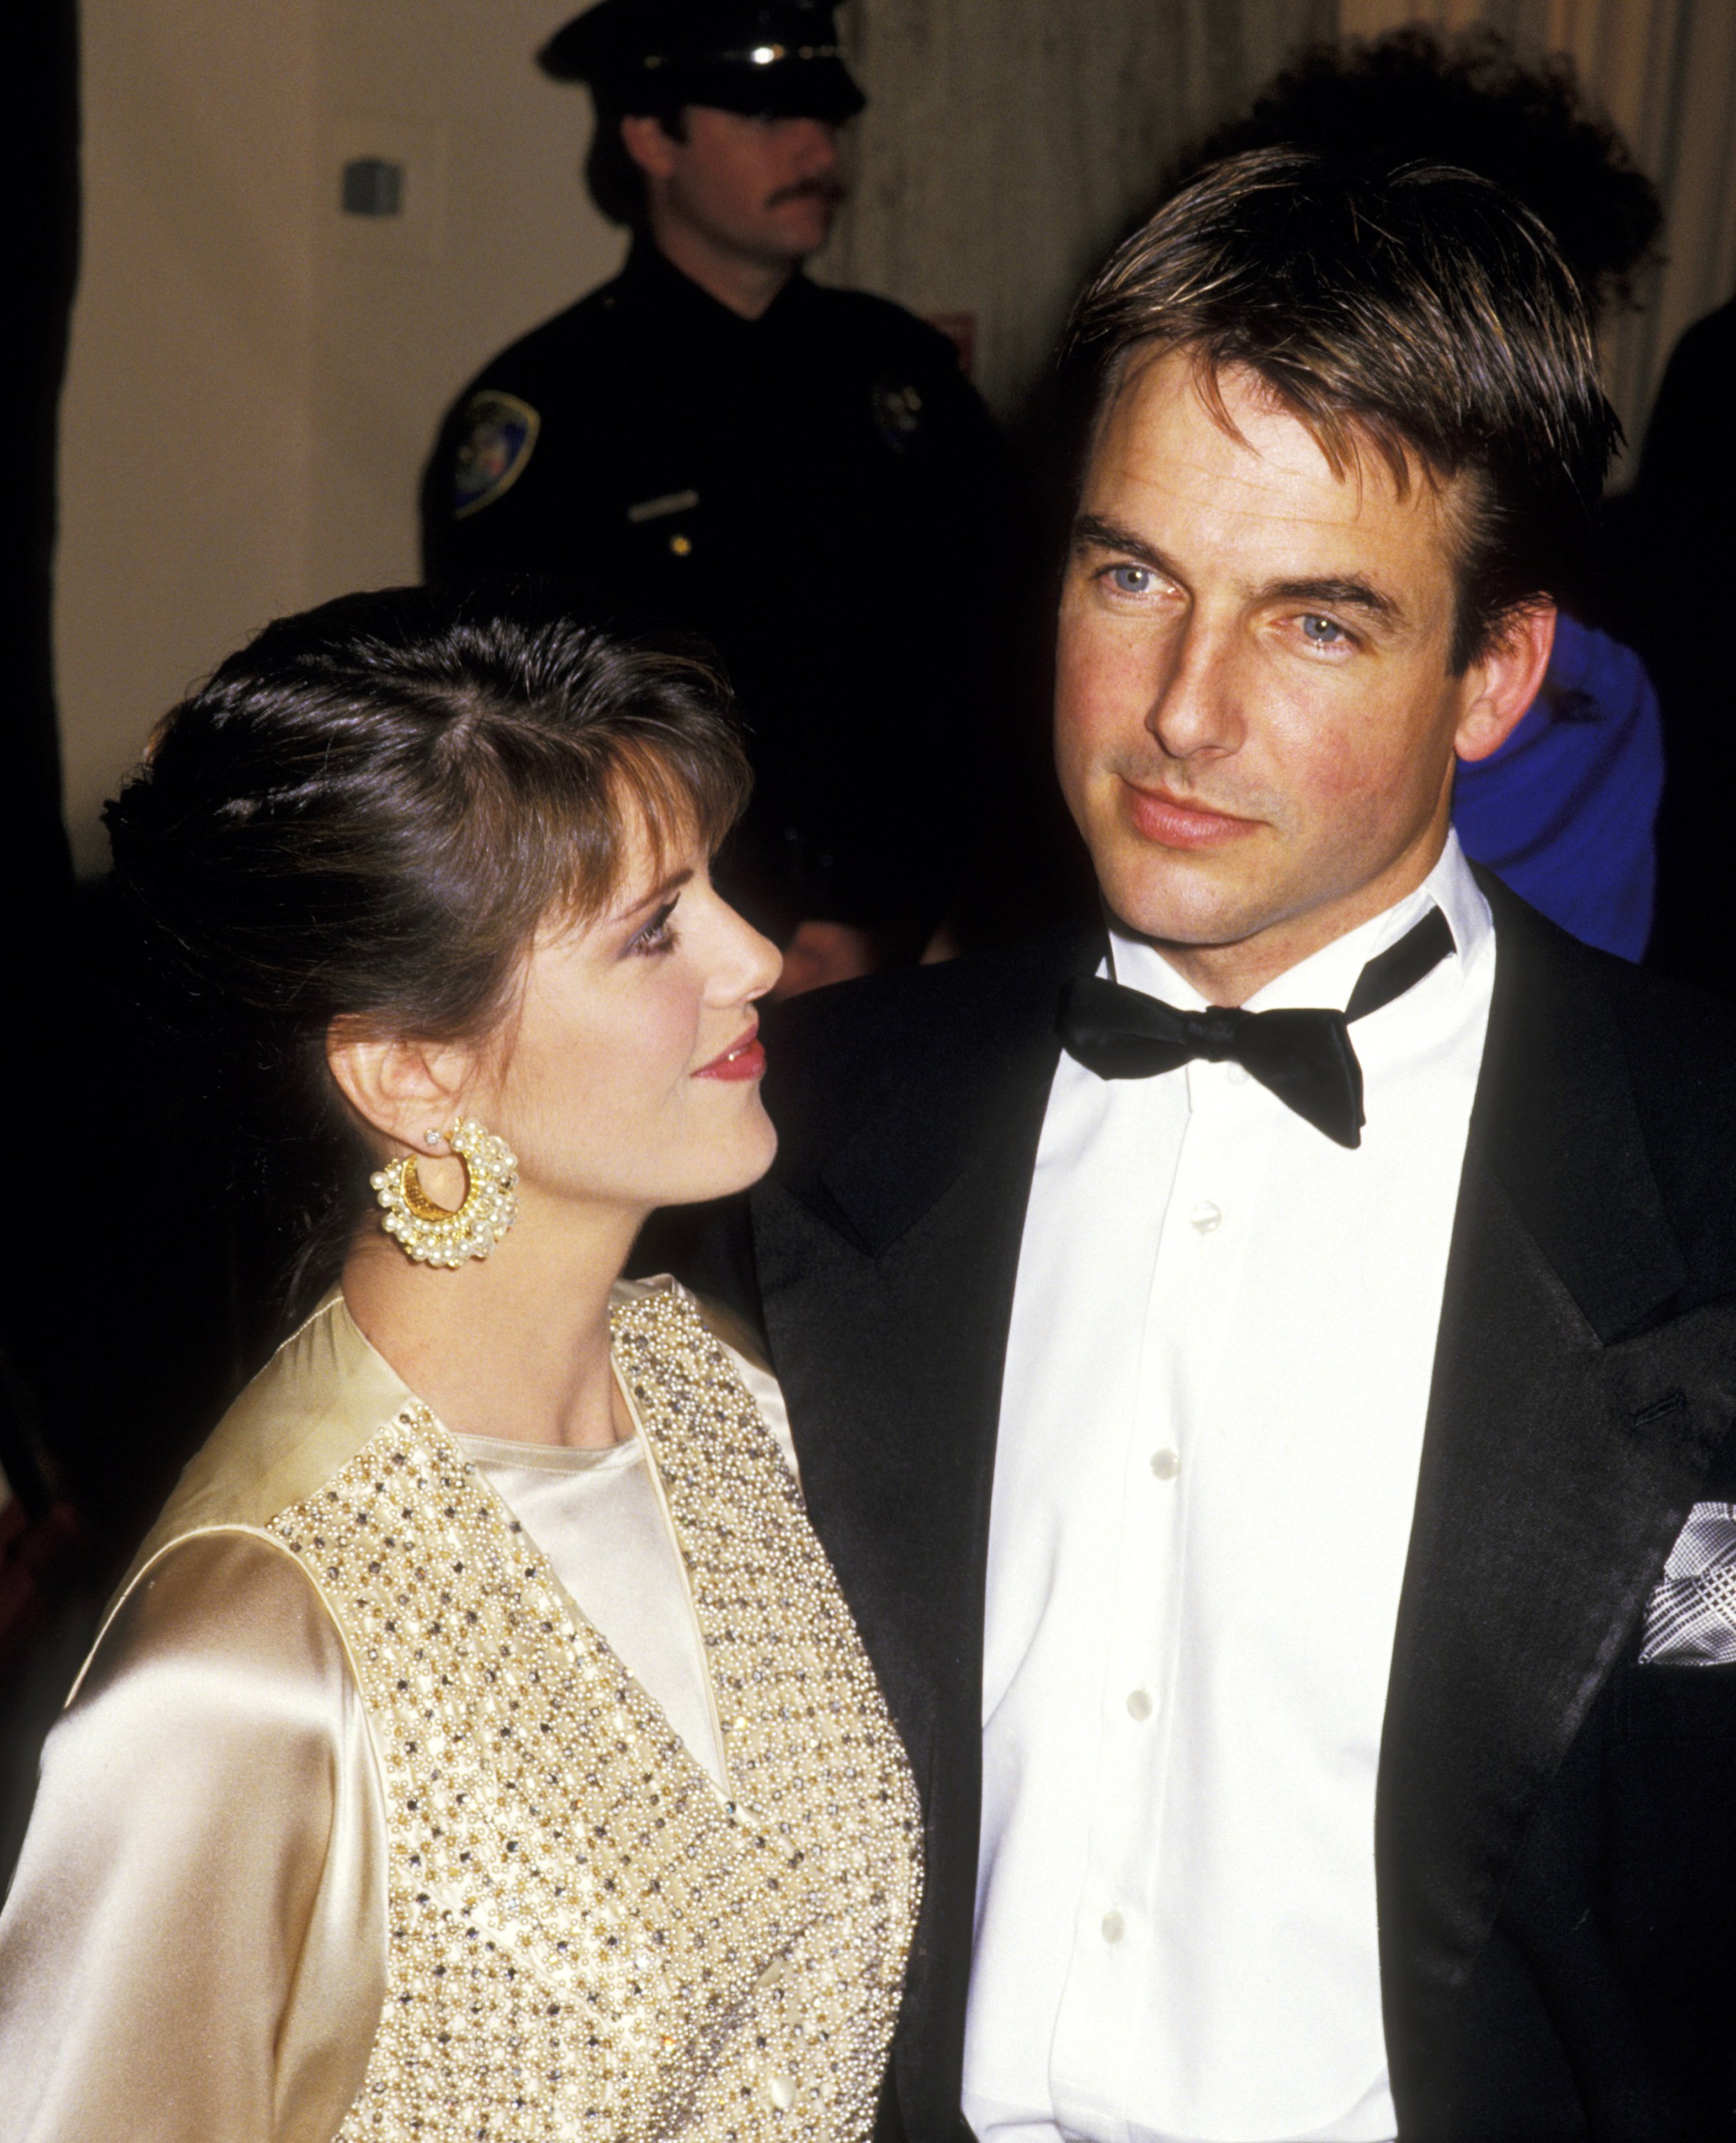 Mark Harmon and his wife Pam Dawber. | Source: Getty Images